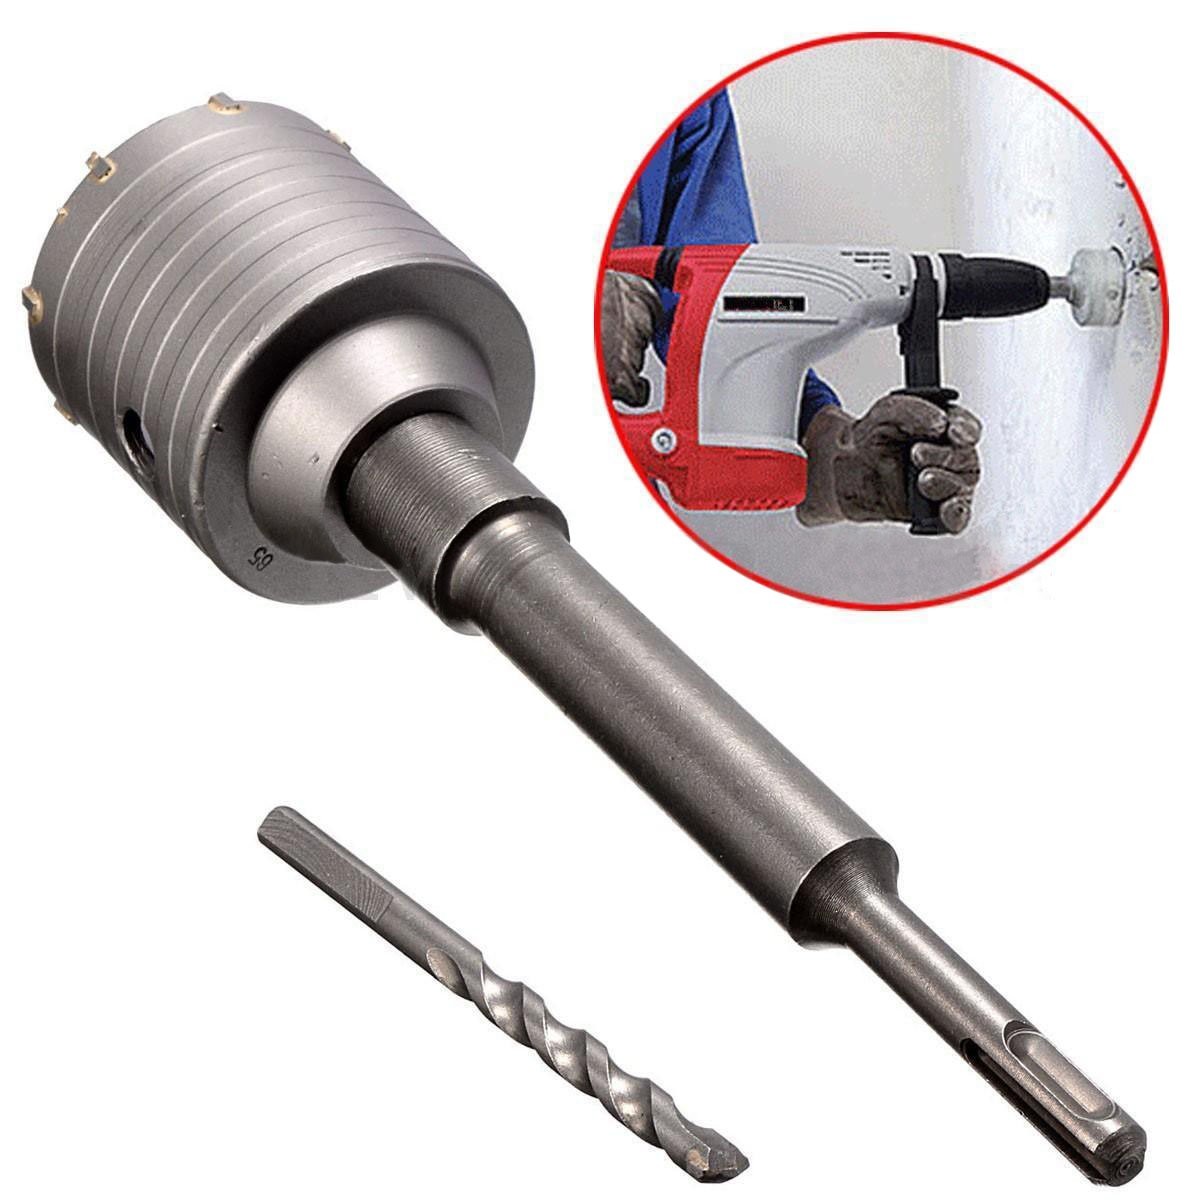 SDS Plus Shank TCT Hole Saw Cutter Concrete Cement Stone Wall Drill Bit With Sandblasted